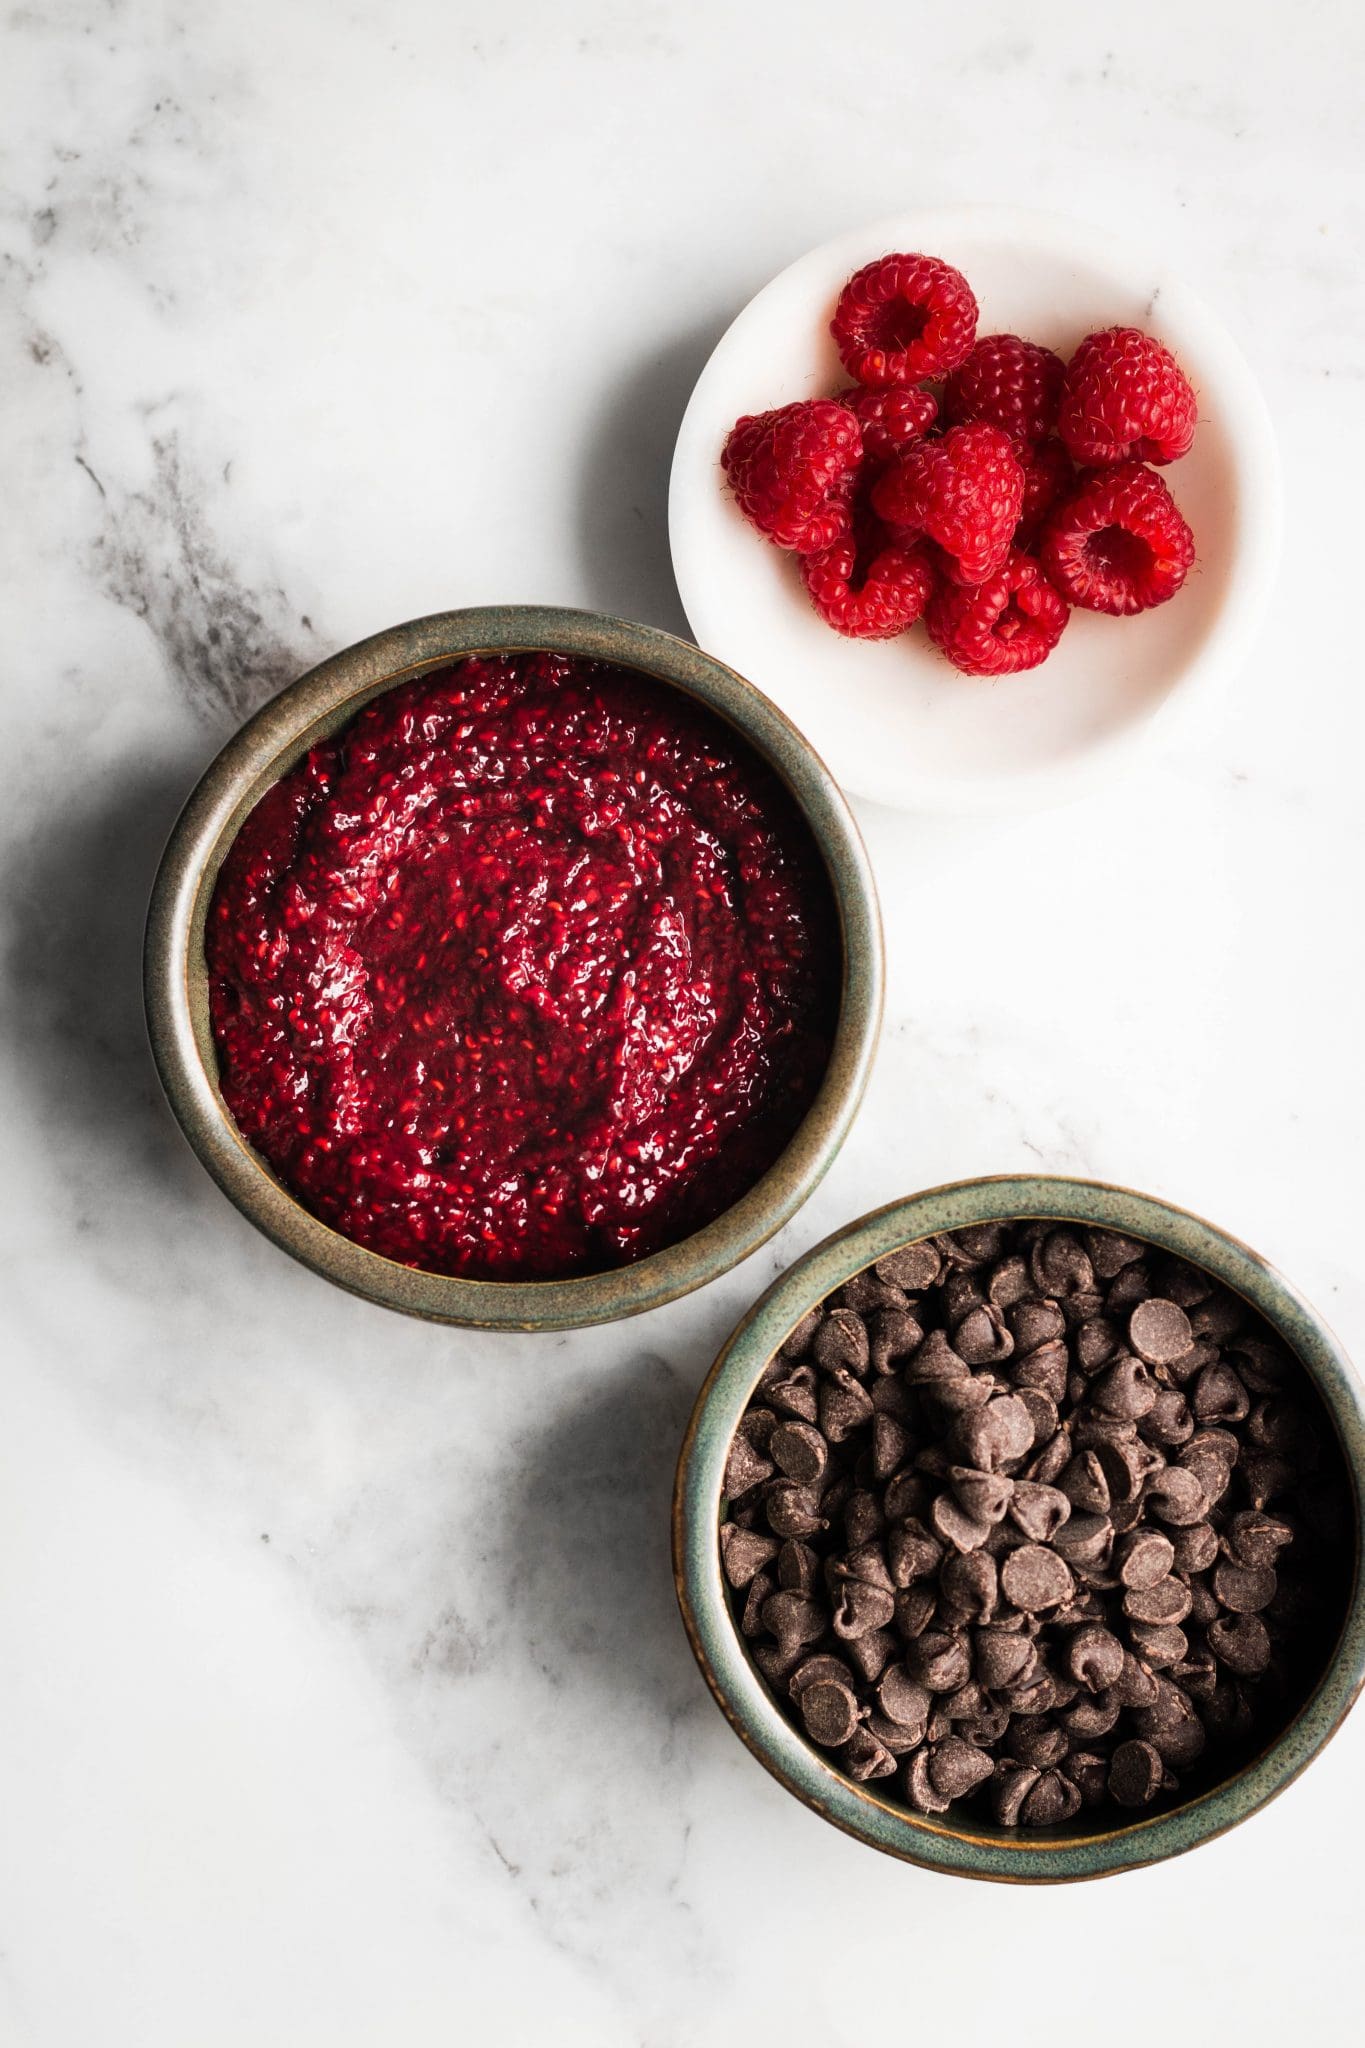 raspberries, jam and chocolate in bowls